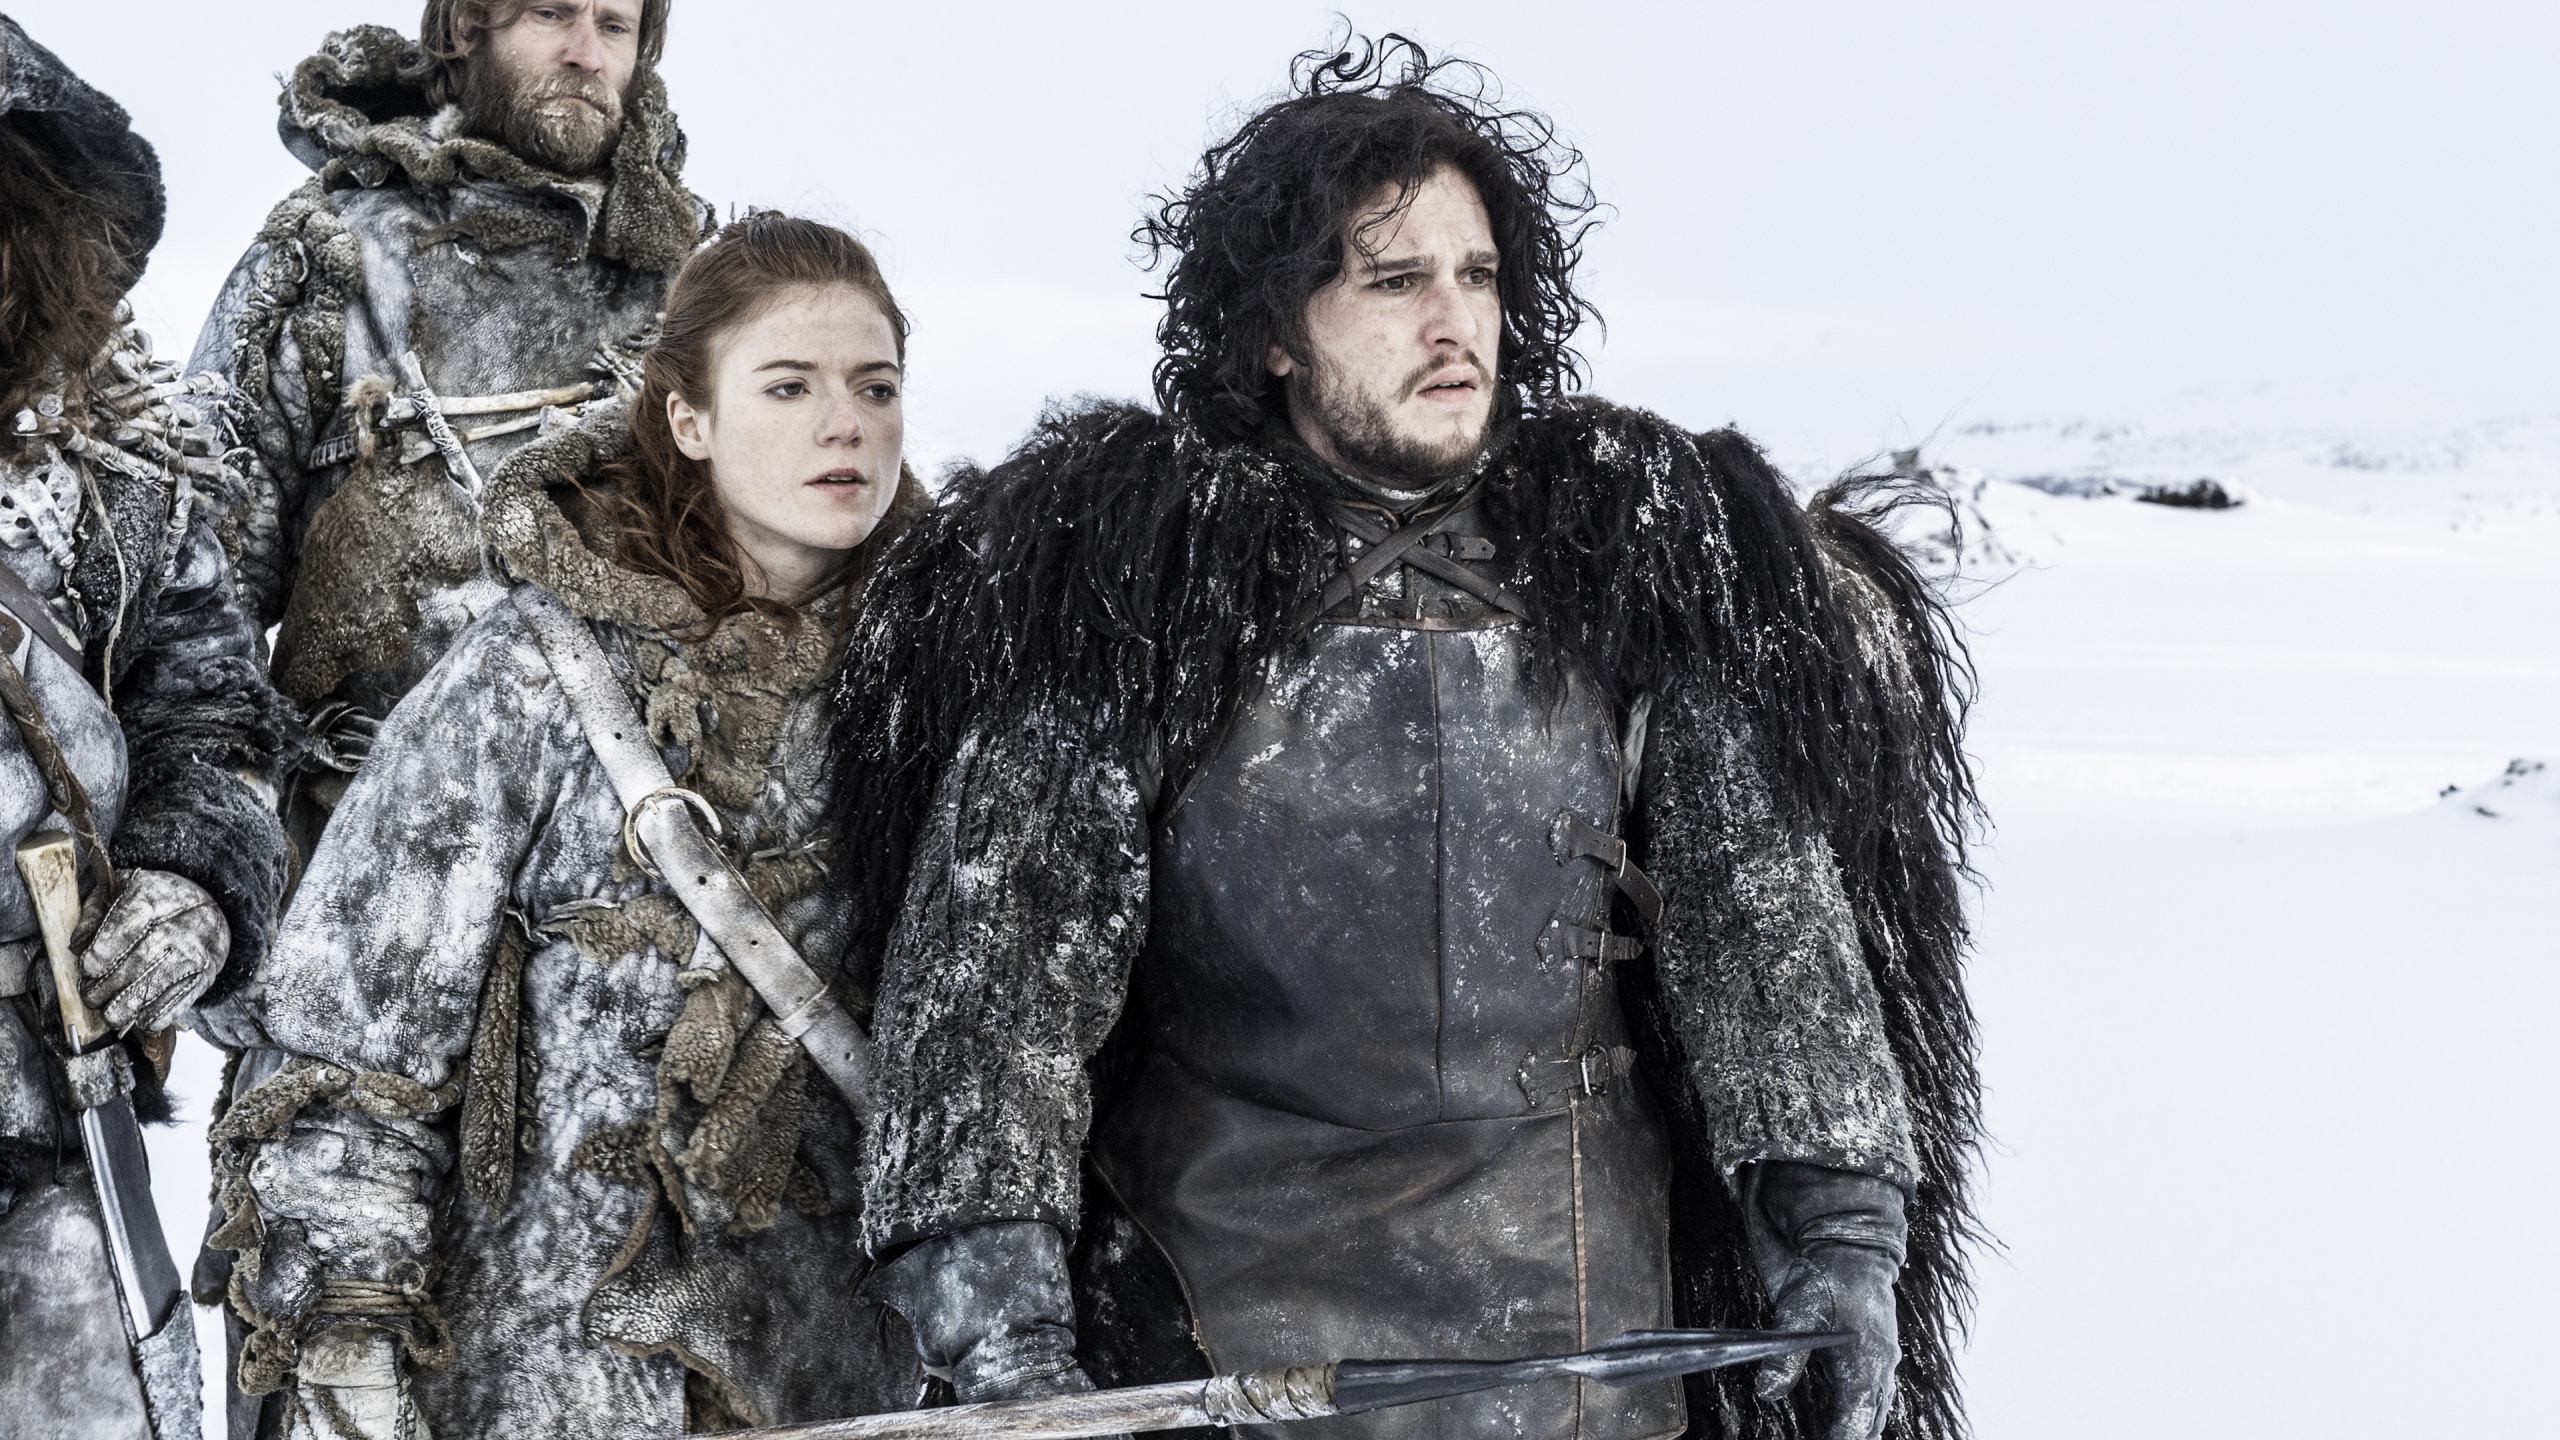 Jon Snow and Ygritte for 2560x1440 HDTV resolution